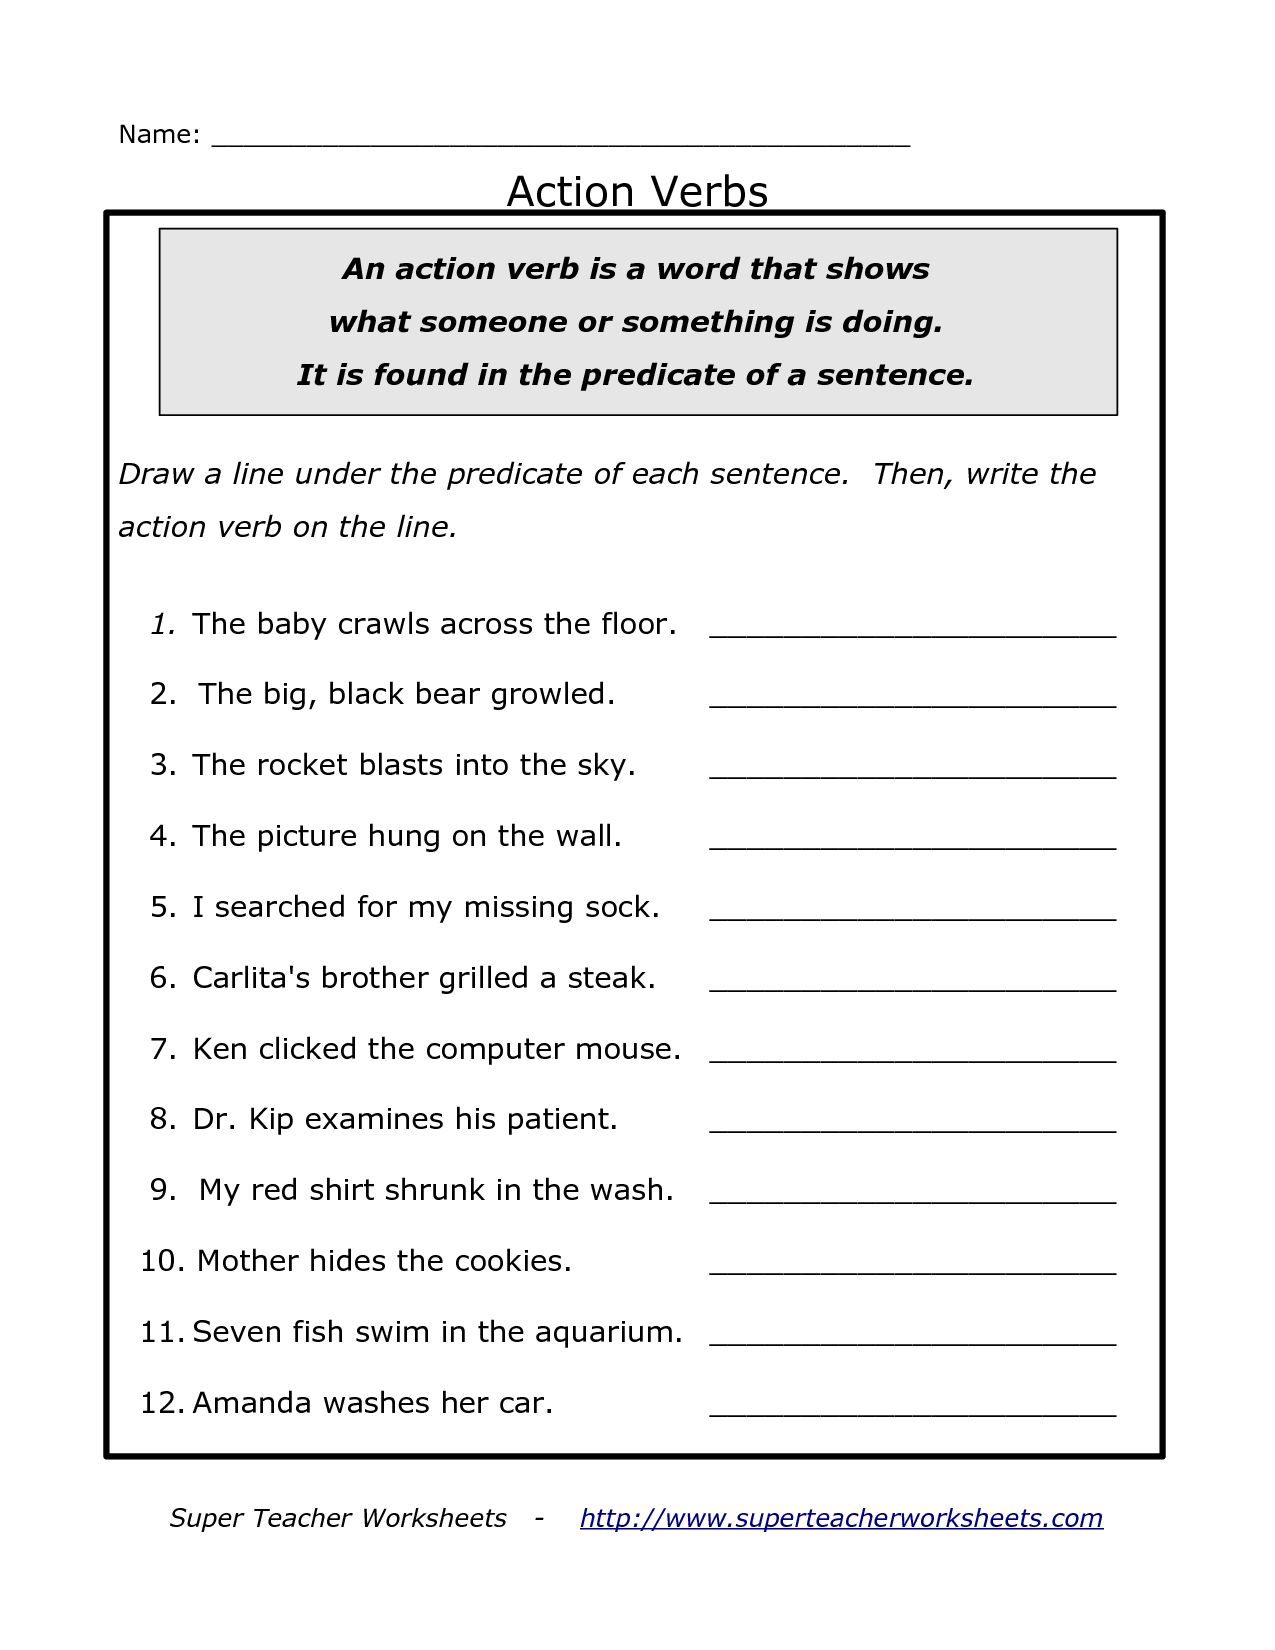 Worksheet With Action Verbs